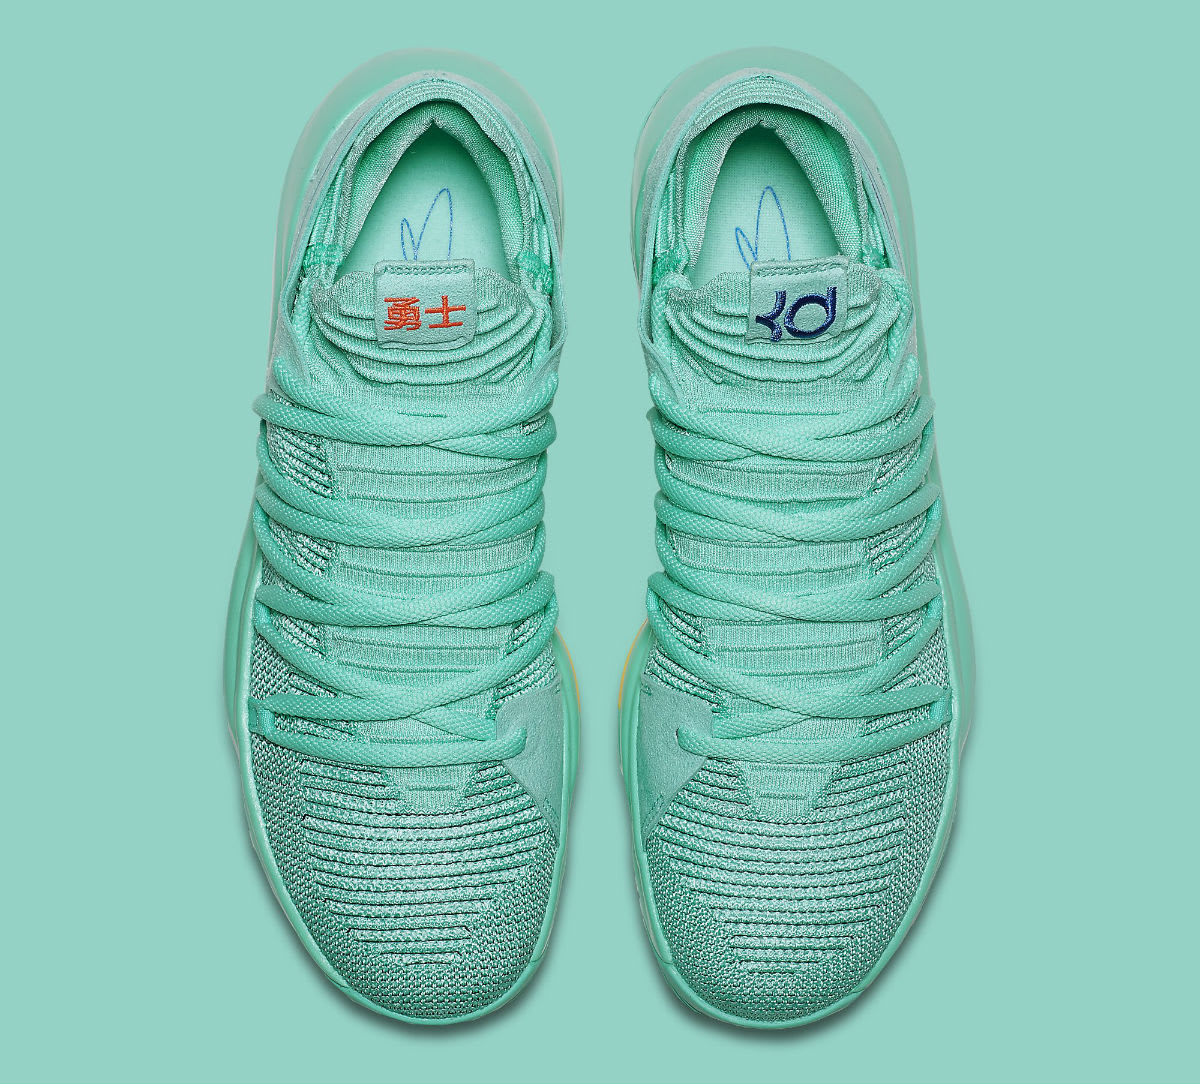 Nike KD 10 X City Edition Hyper Turquoise Racer Blue Release Date 897816-300 Top